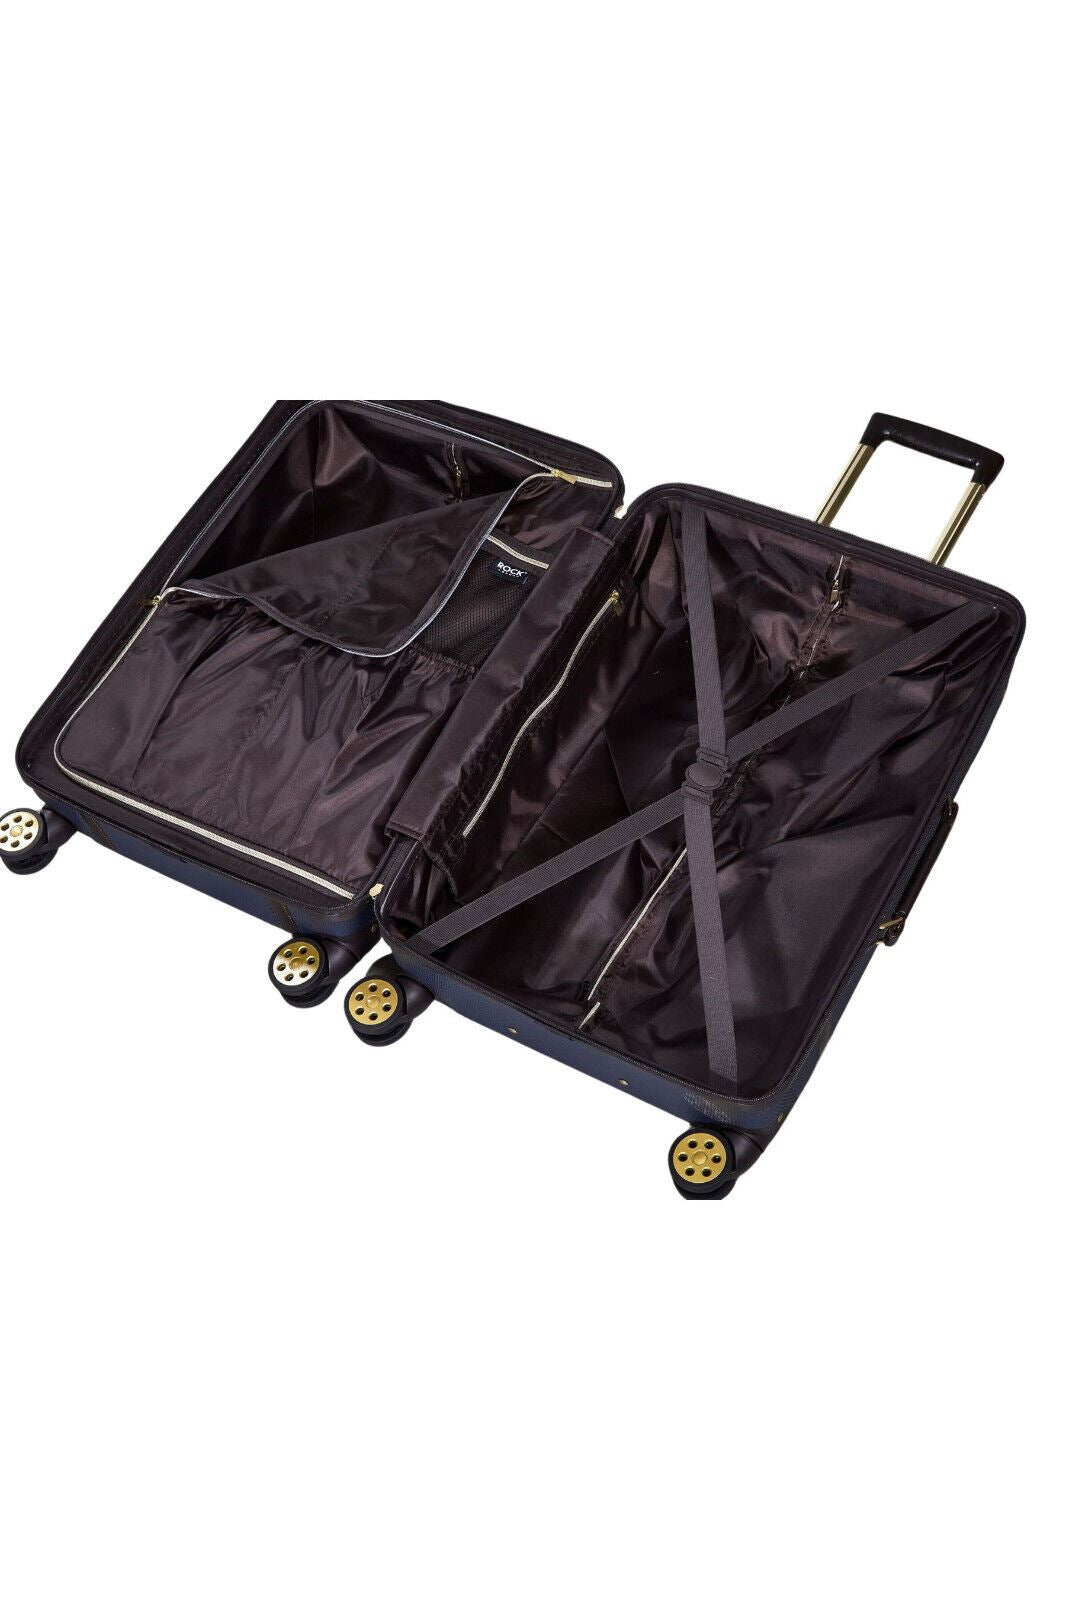 Hard Shell Navy Blue Luggage Suitcase Set Trunk Cabin Travel Bags